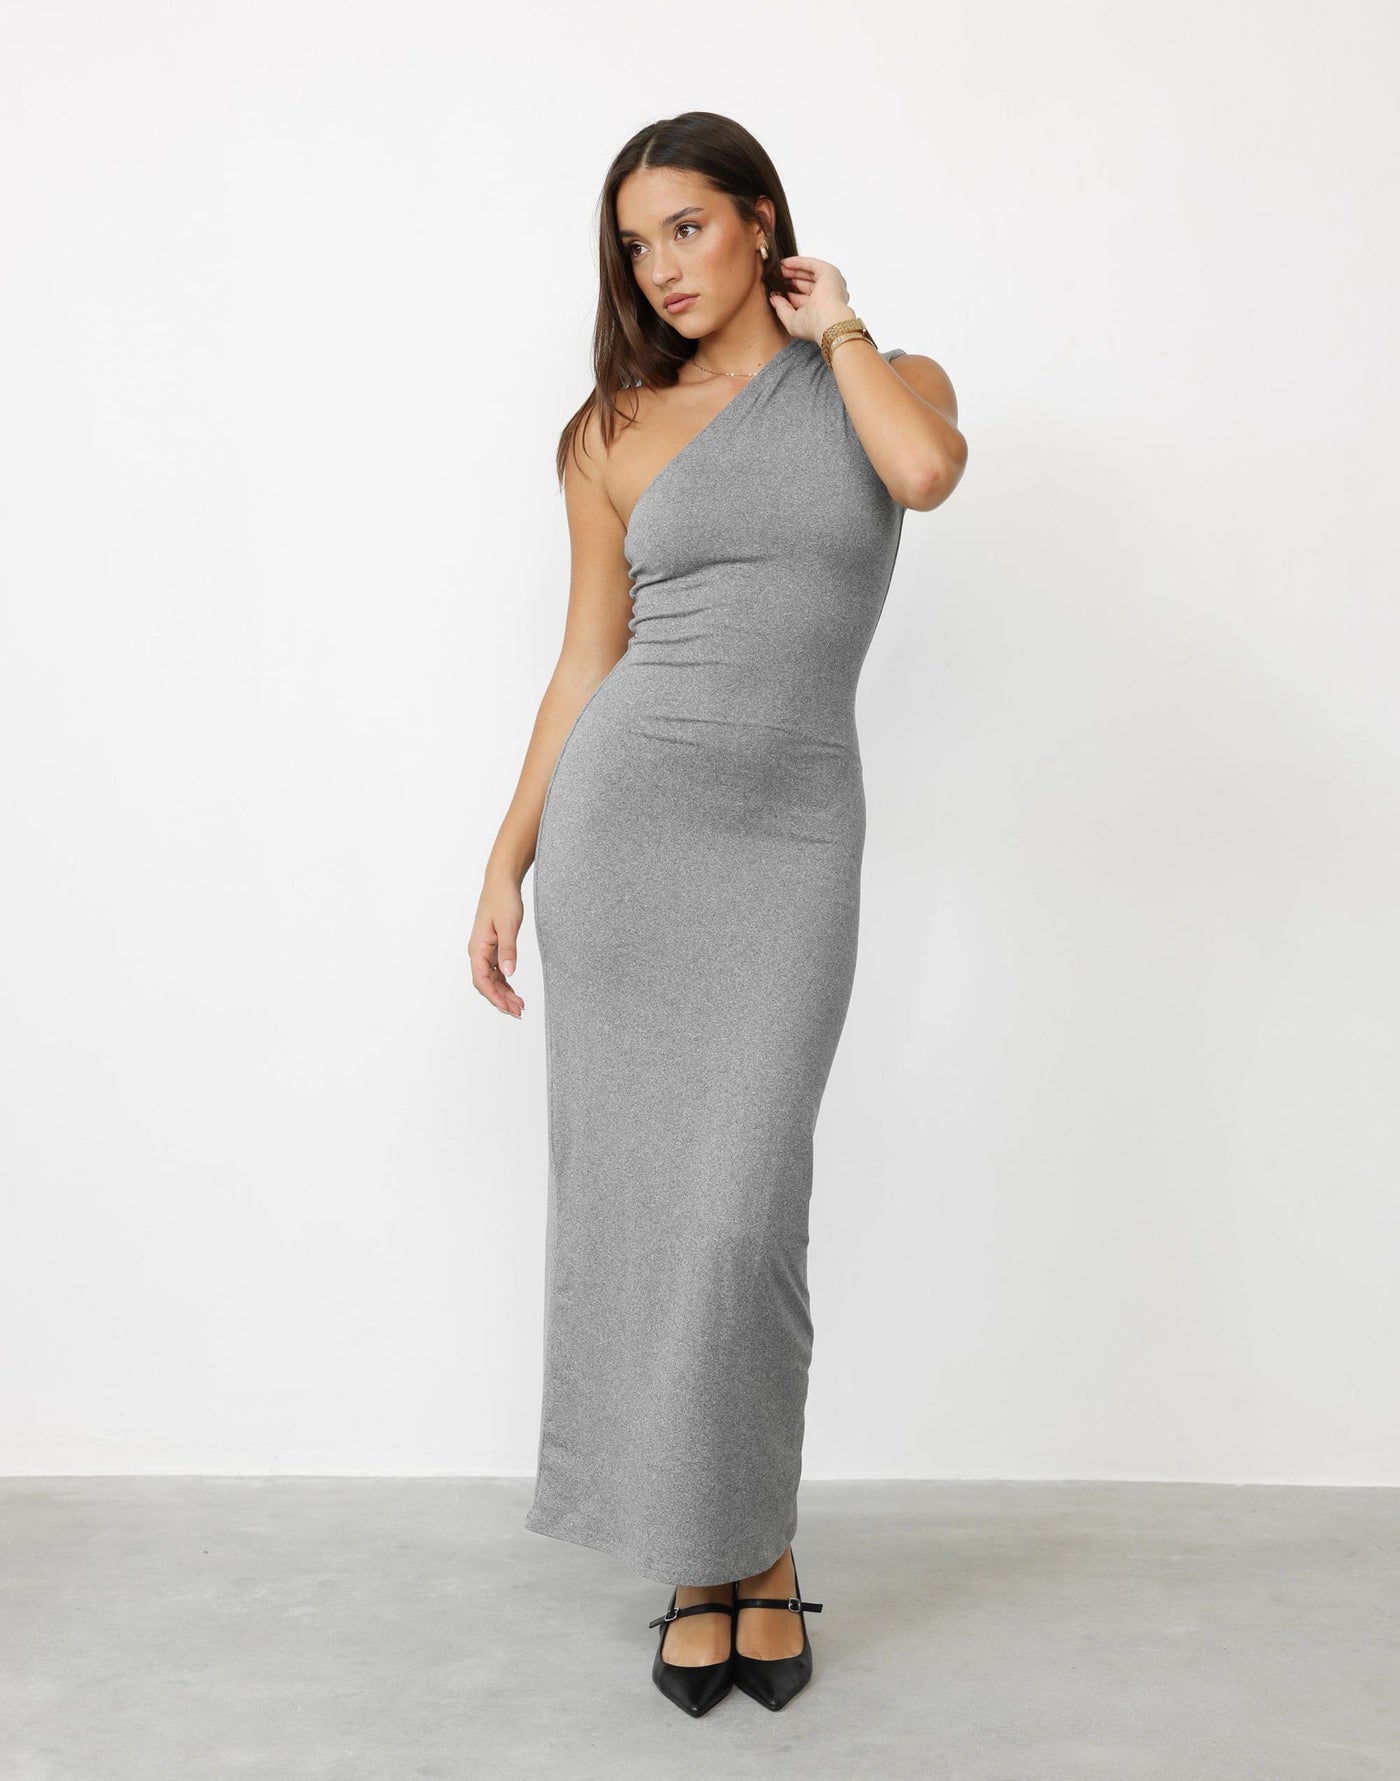 Jovelle Maxi Dress (Grey) | CHARCOAL Exclusive - Bodycon Thick One Shoulder Marle Maxi Dress - Women's Dress - Charcoal Clothing